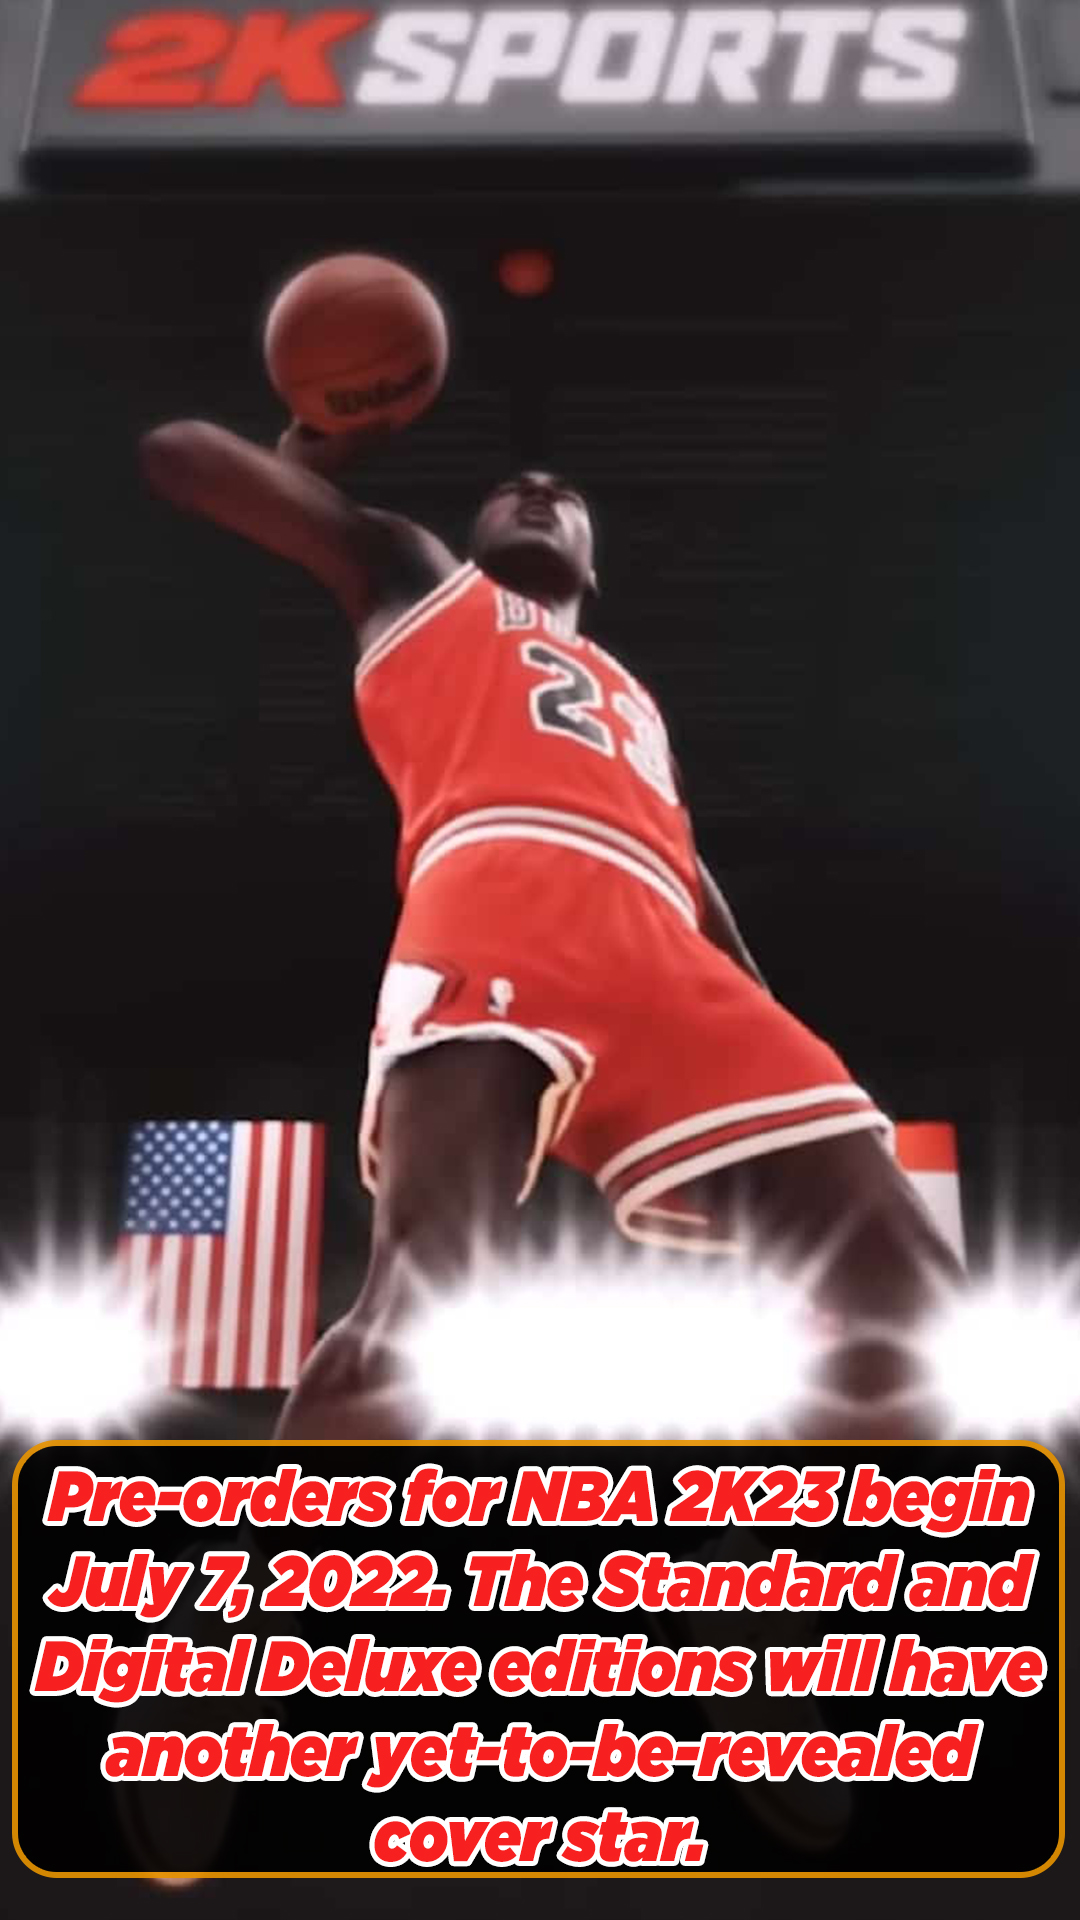 The Year of Greatness: Michael Jordan Unveiled as NBA® 2K23 Cover Athlete  Across Two Special Editions of This Year's Game